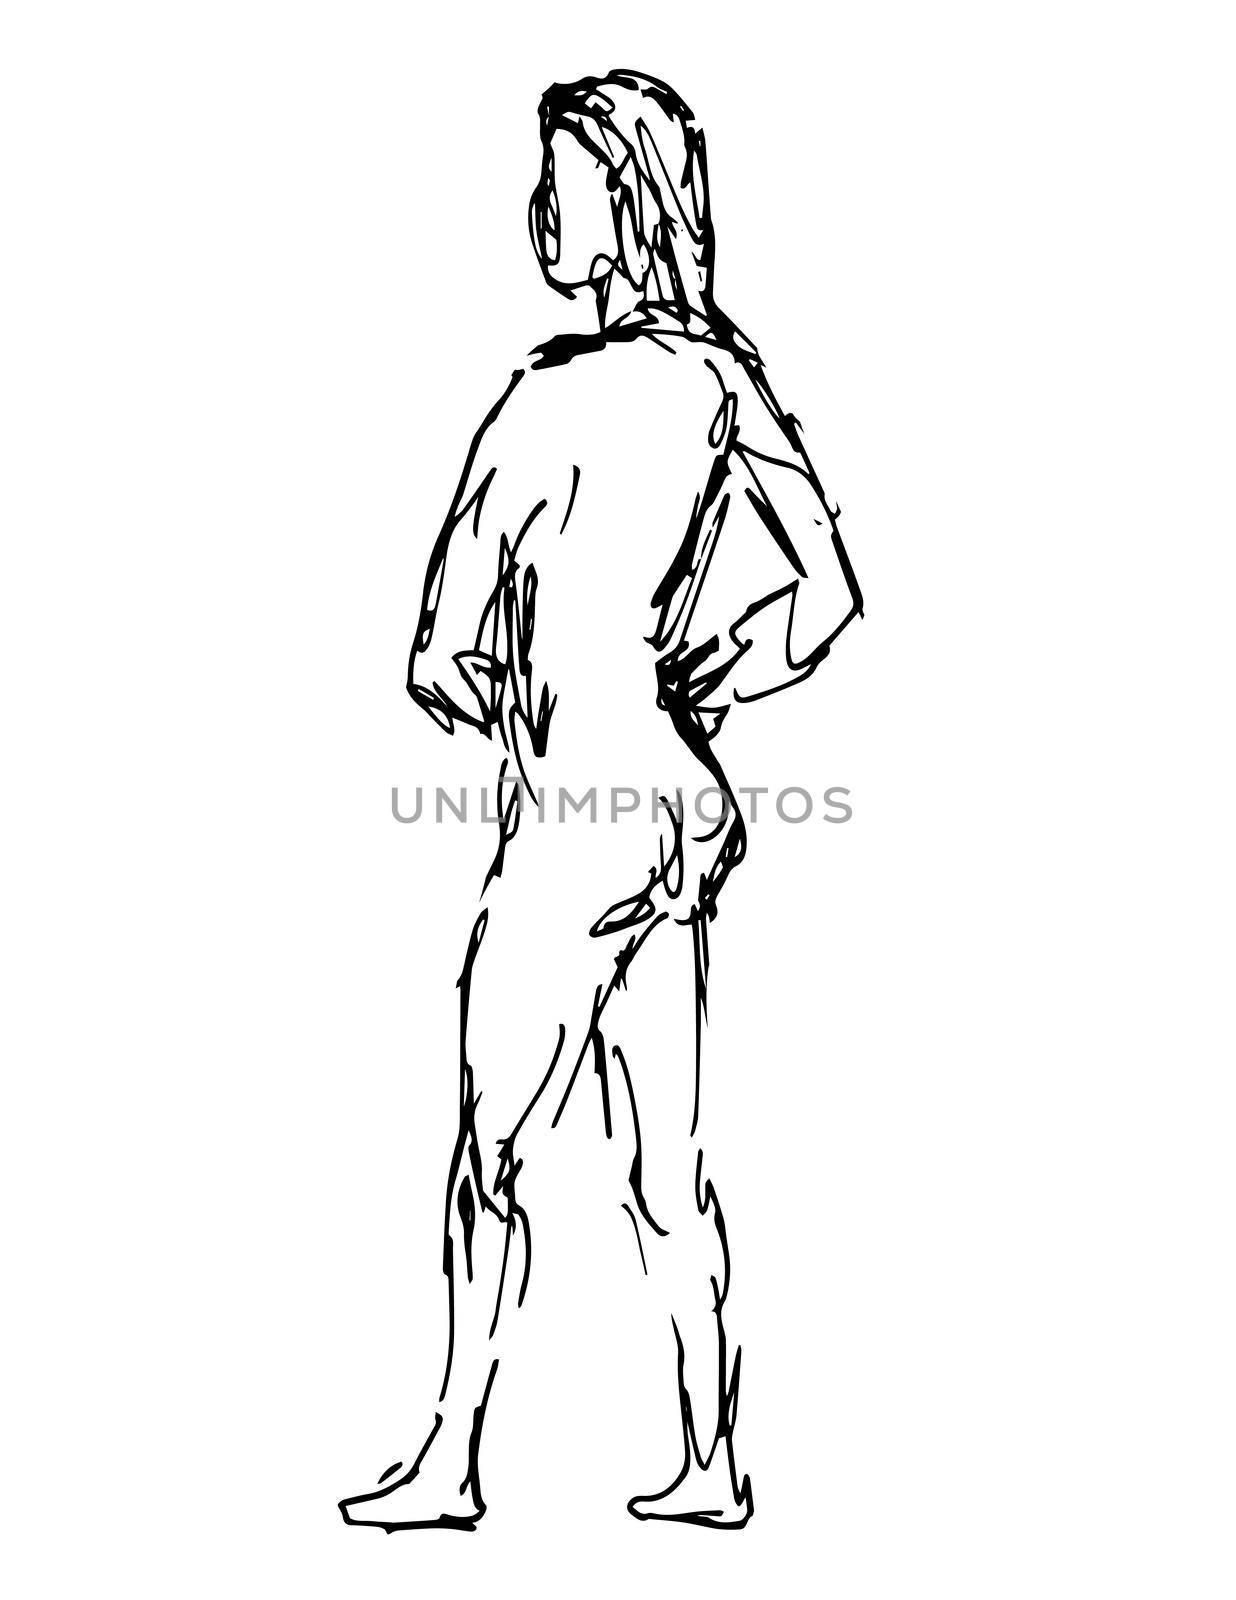 Doodle art illustration of a nude female figure standing with hands on hip side view done in continuous line drawing style in black and white on isolated background.